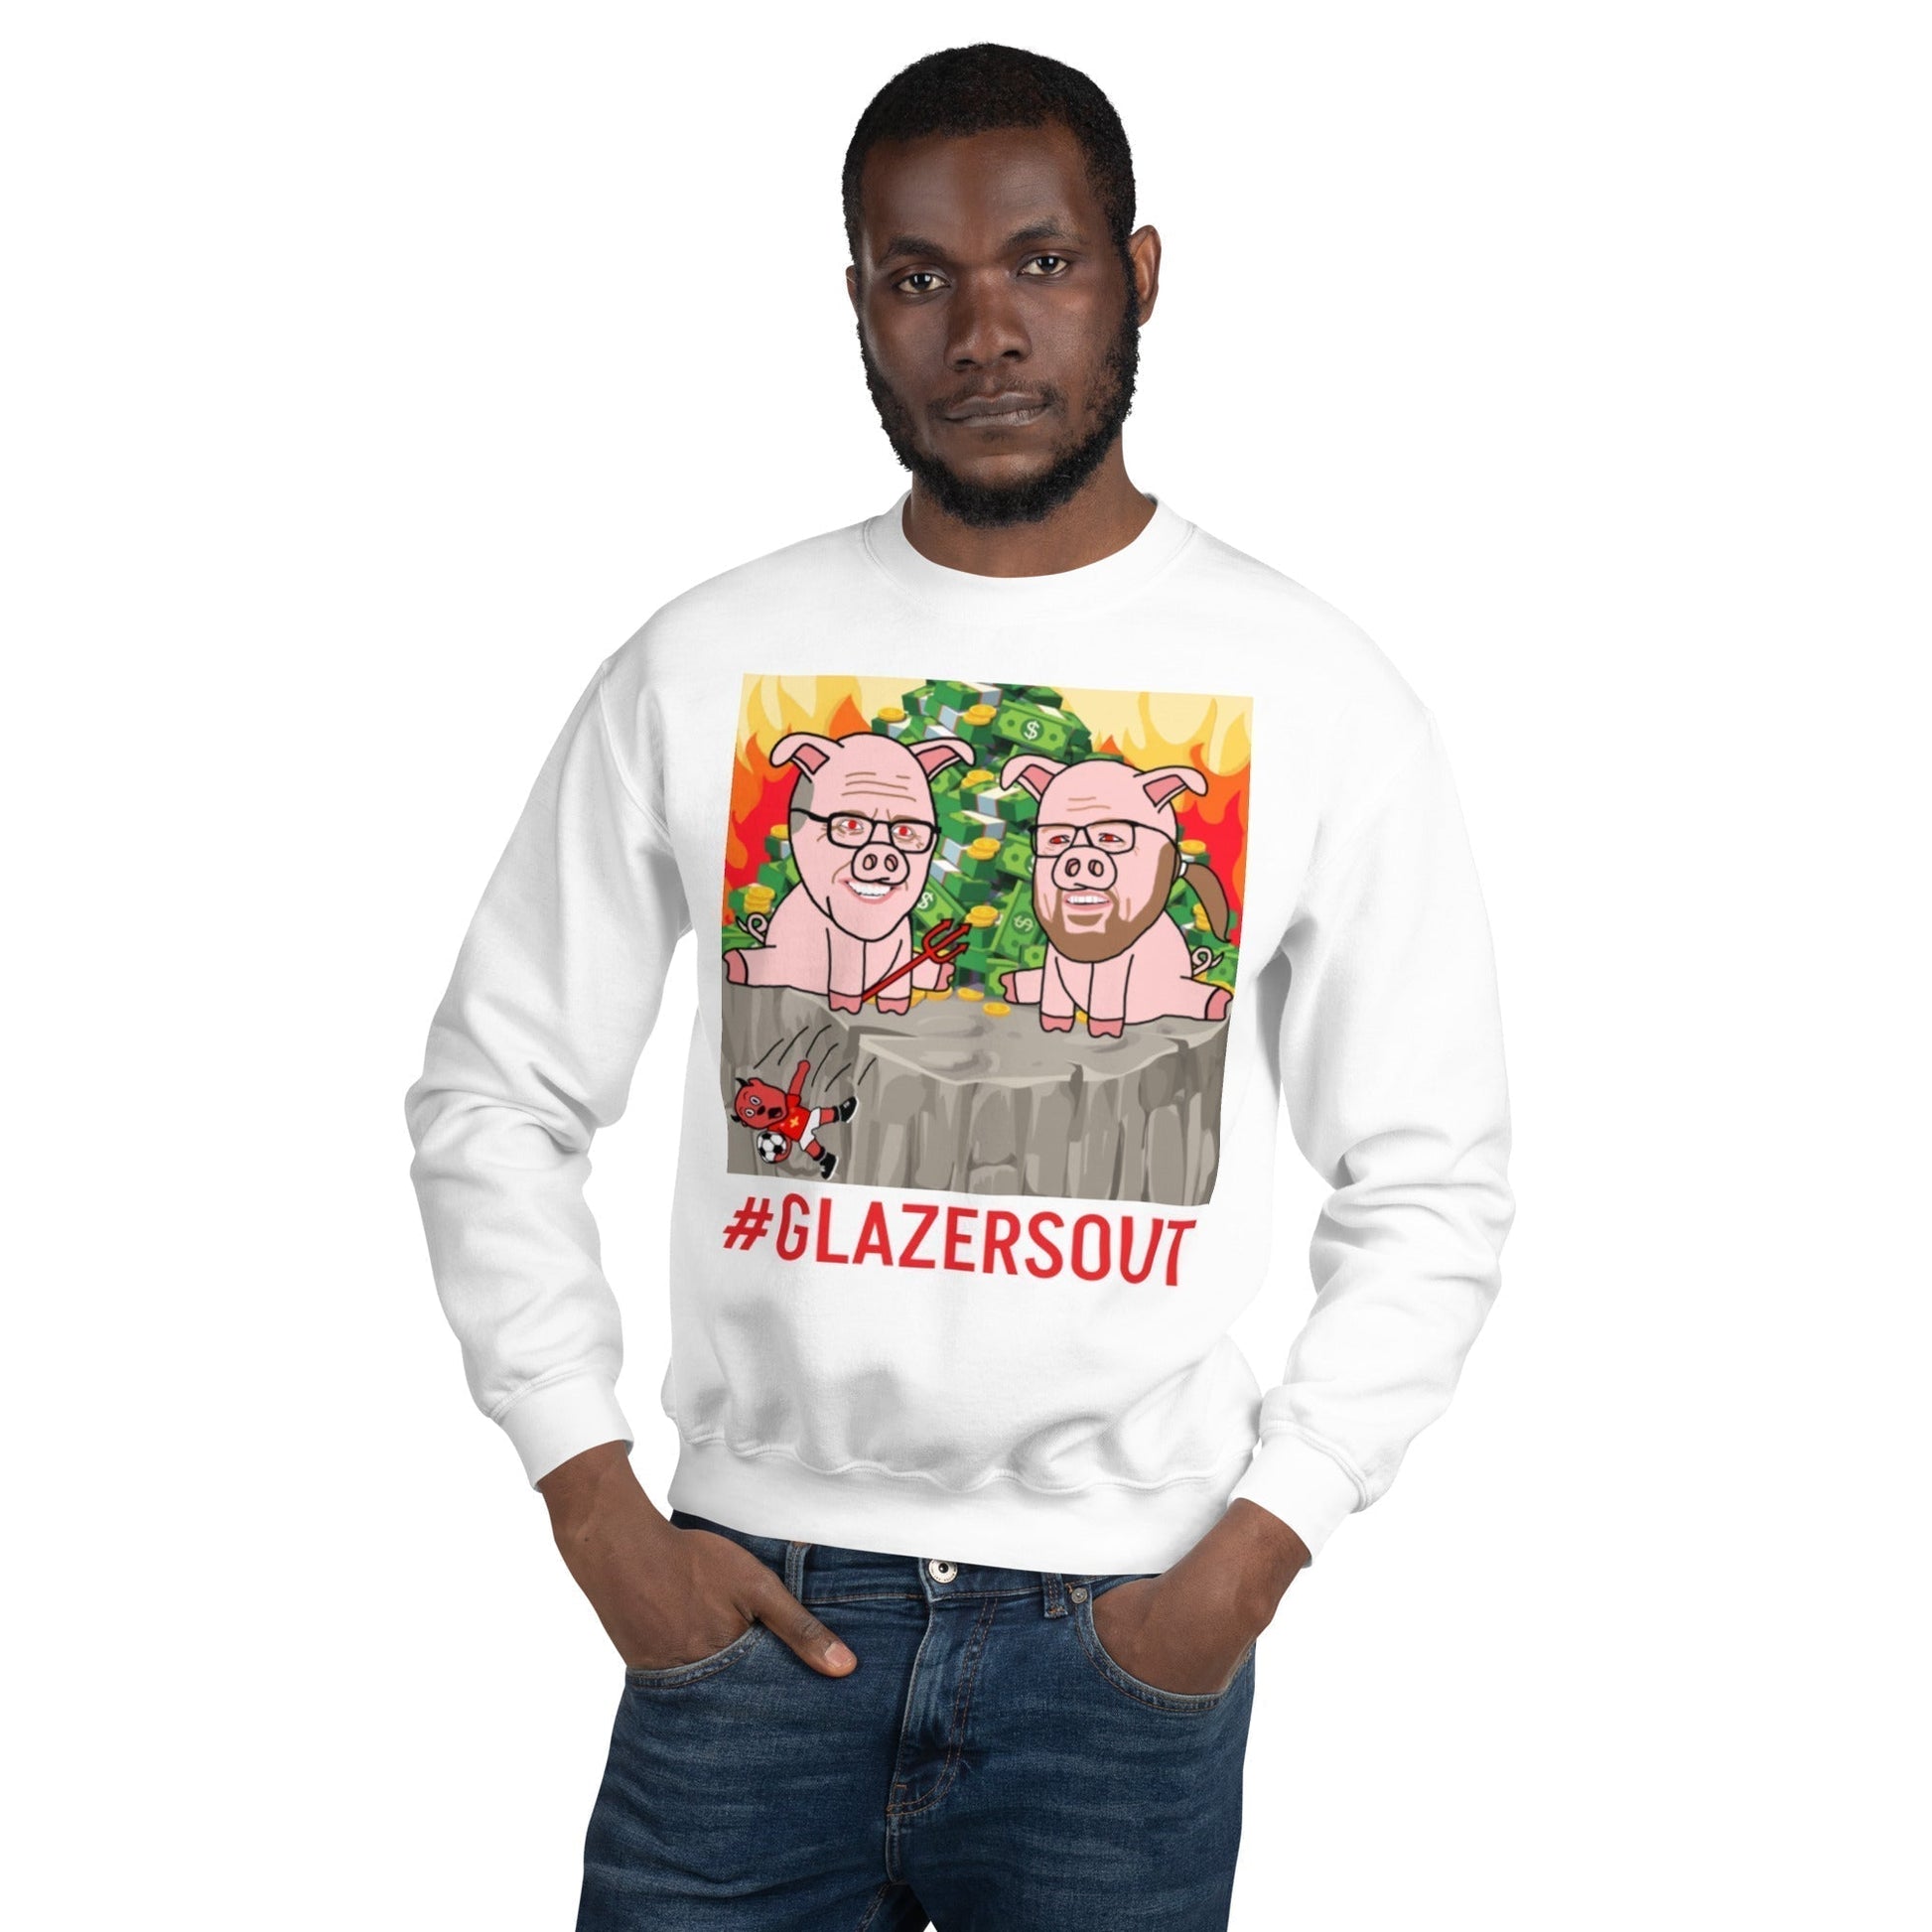 Glazers Out Manchester United Unisex Sweatshirt, Red Letters, #GlazersOut Next Cult Brand Football, GlazersOut, Manchester United